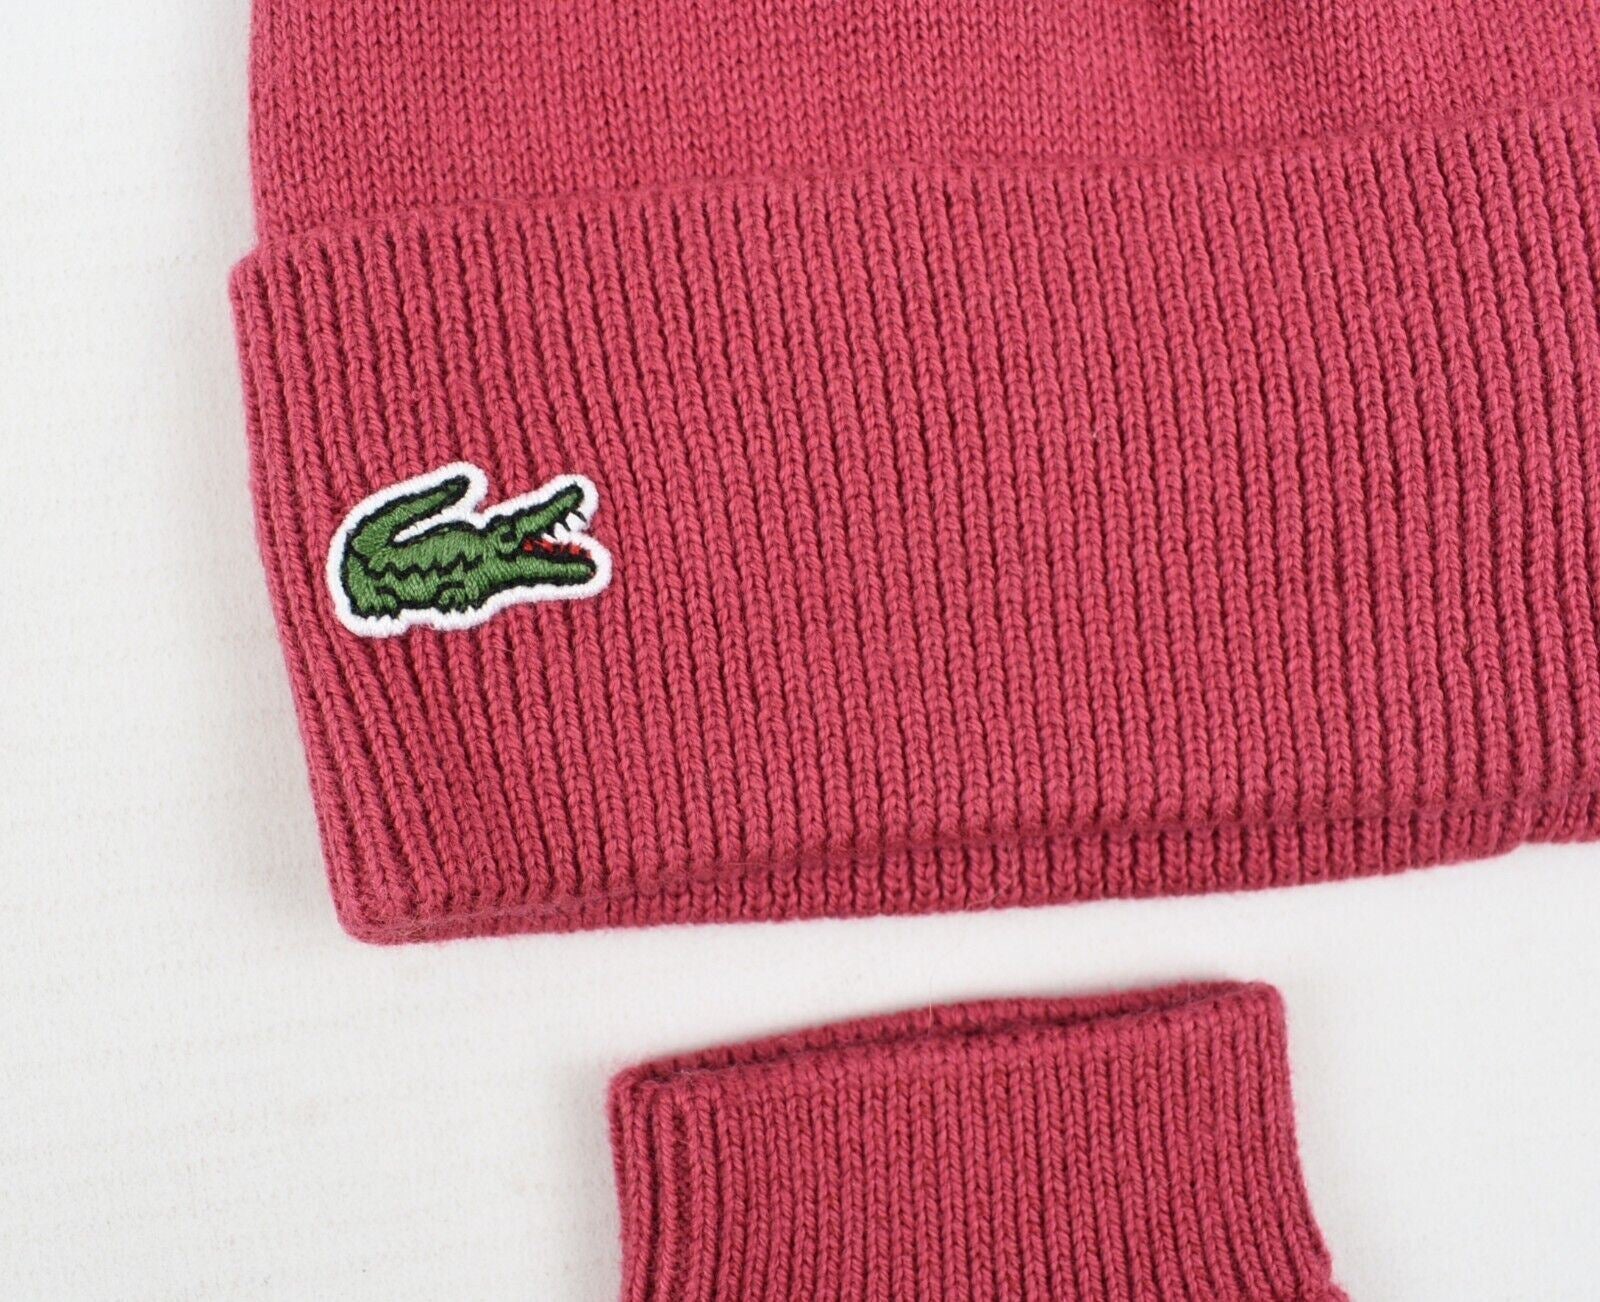 LACOSTE Girls 2-pc Winter Set, Beanie Hat + Gloves, Pink, size S (4-5 years)